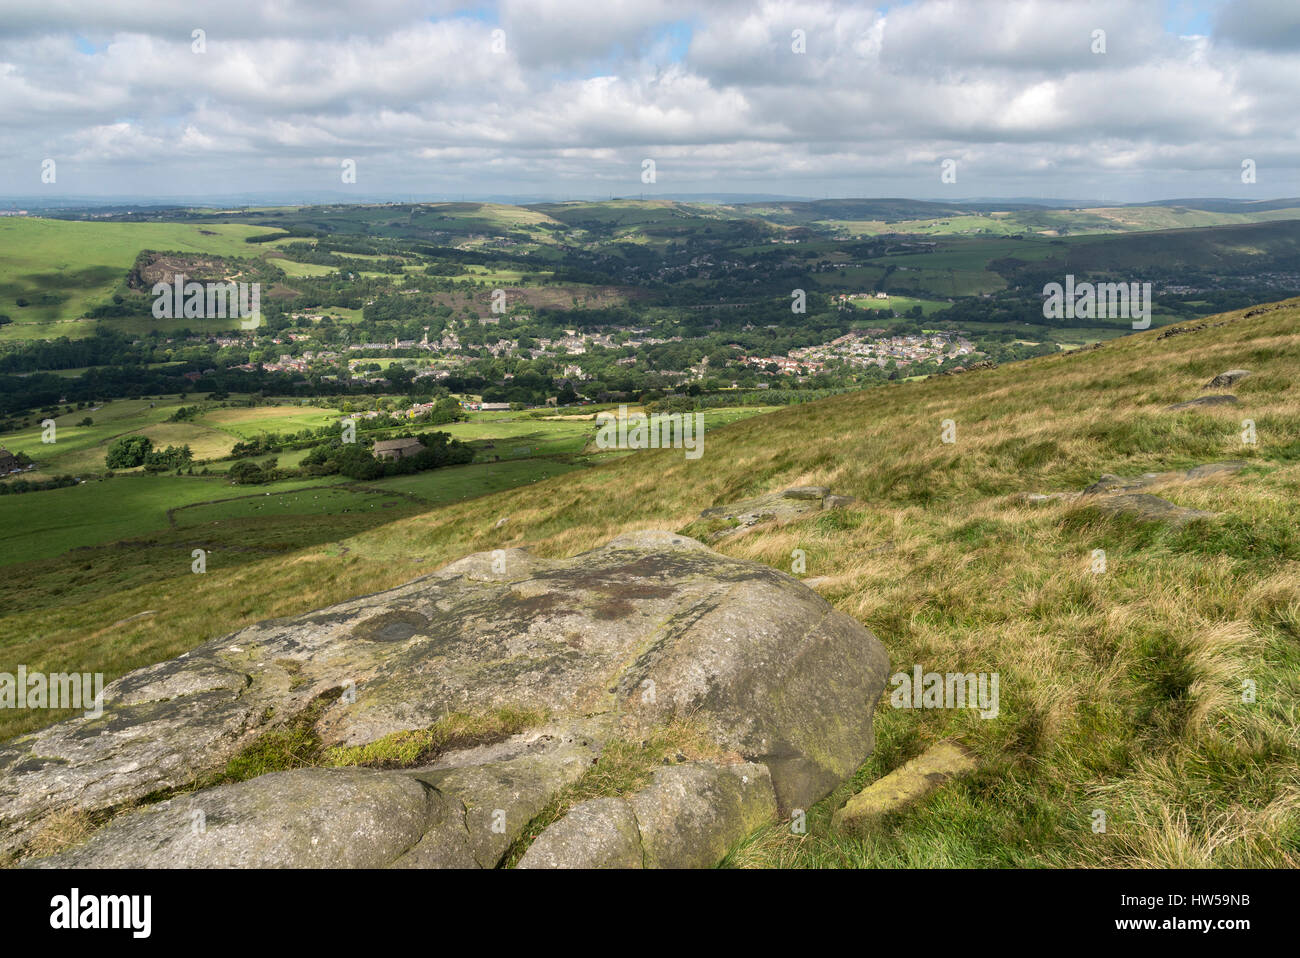 View of Uppermill and the Tame valley, Saddleworth, Great Manchester, England Stock Photo